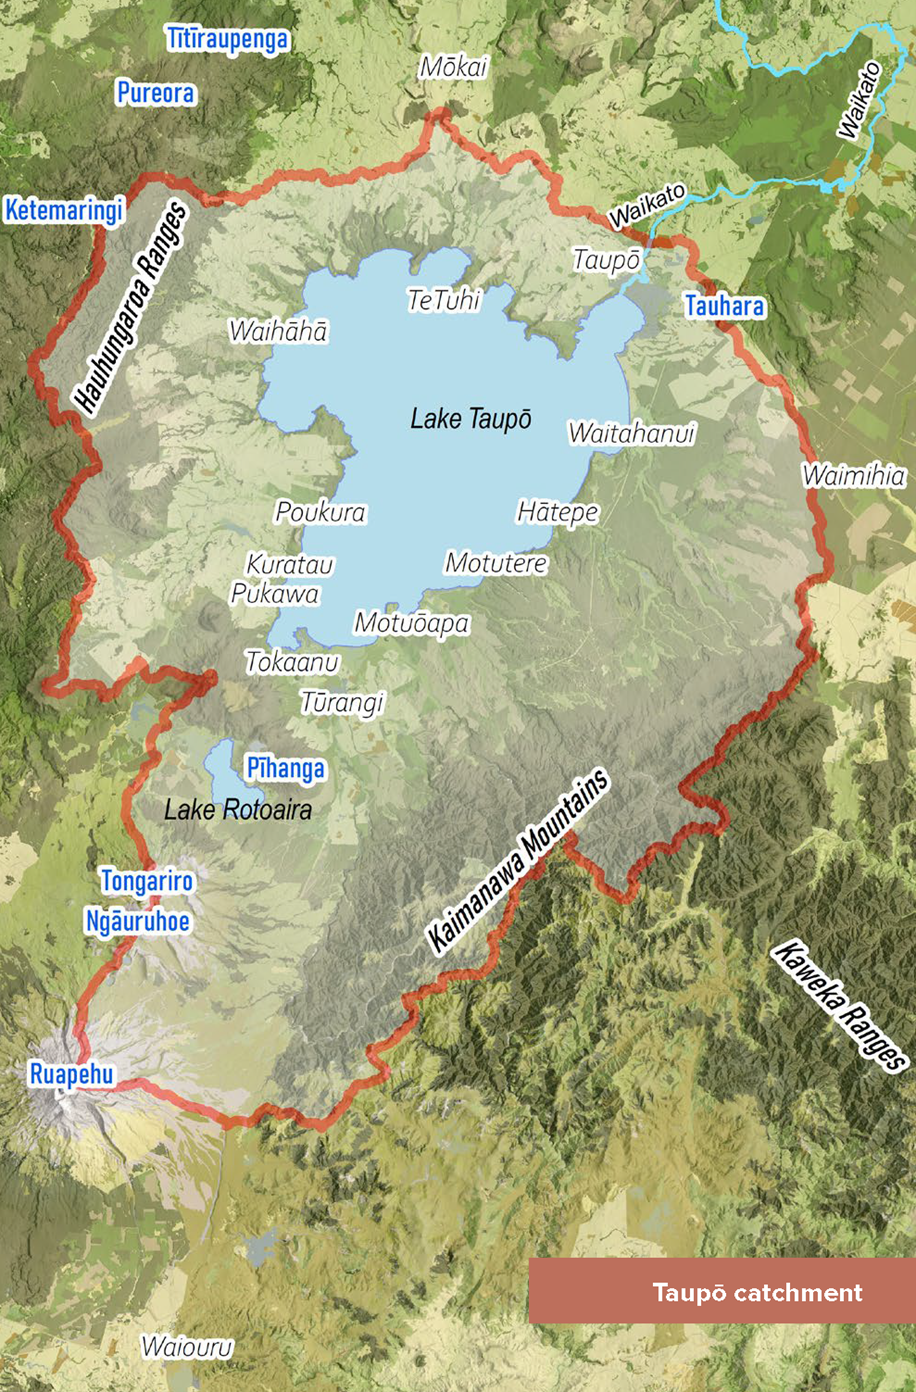 Map -  Taupō catchment for Taupo  Taupō catchment plan